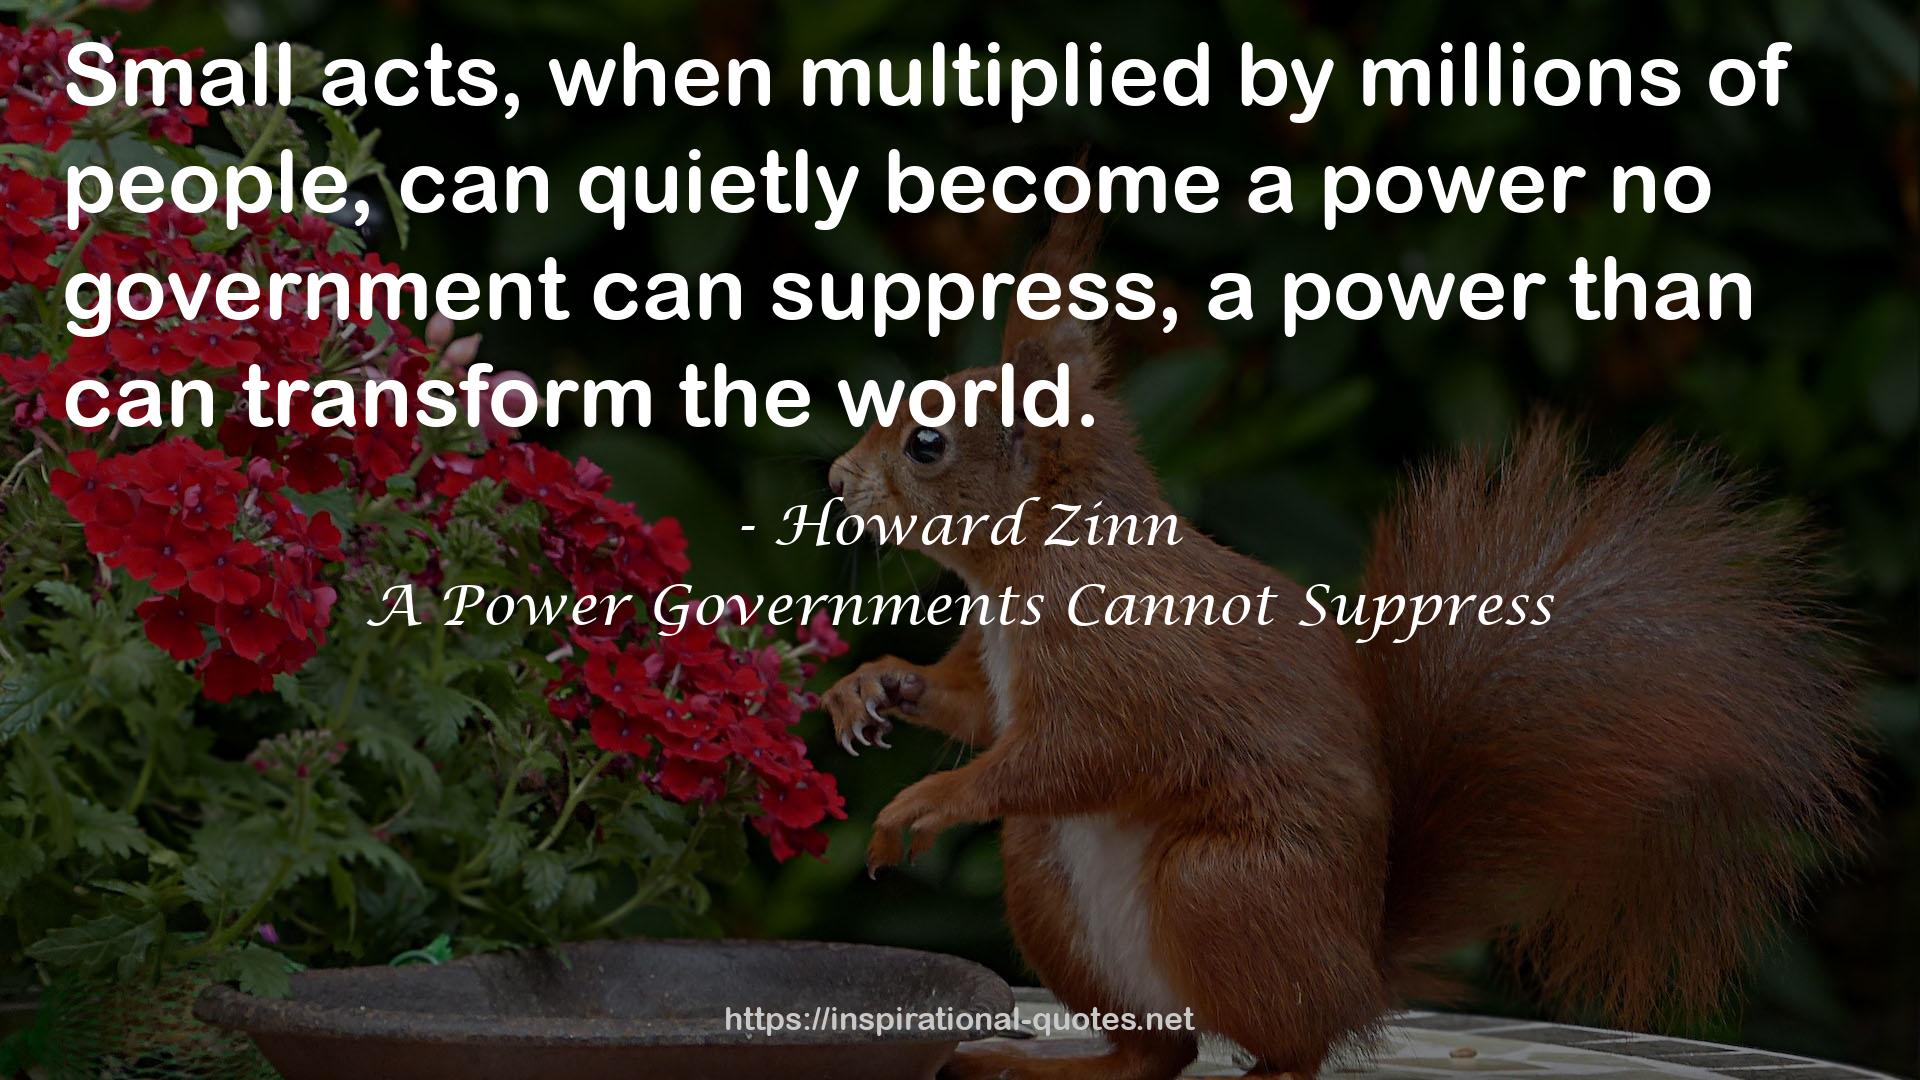 A Power Governments Cannot Suppress QUOTES